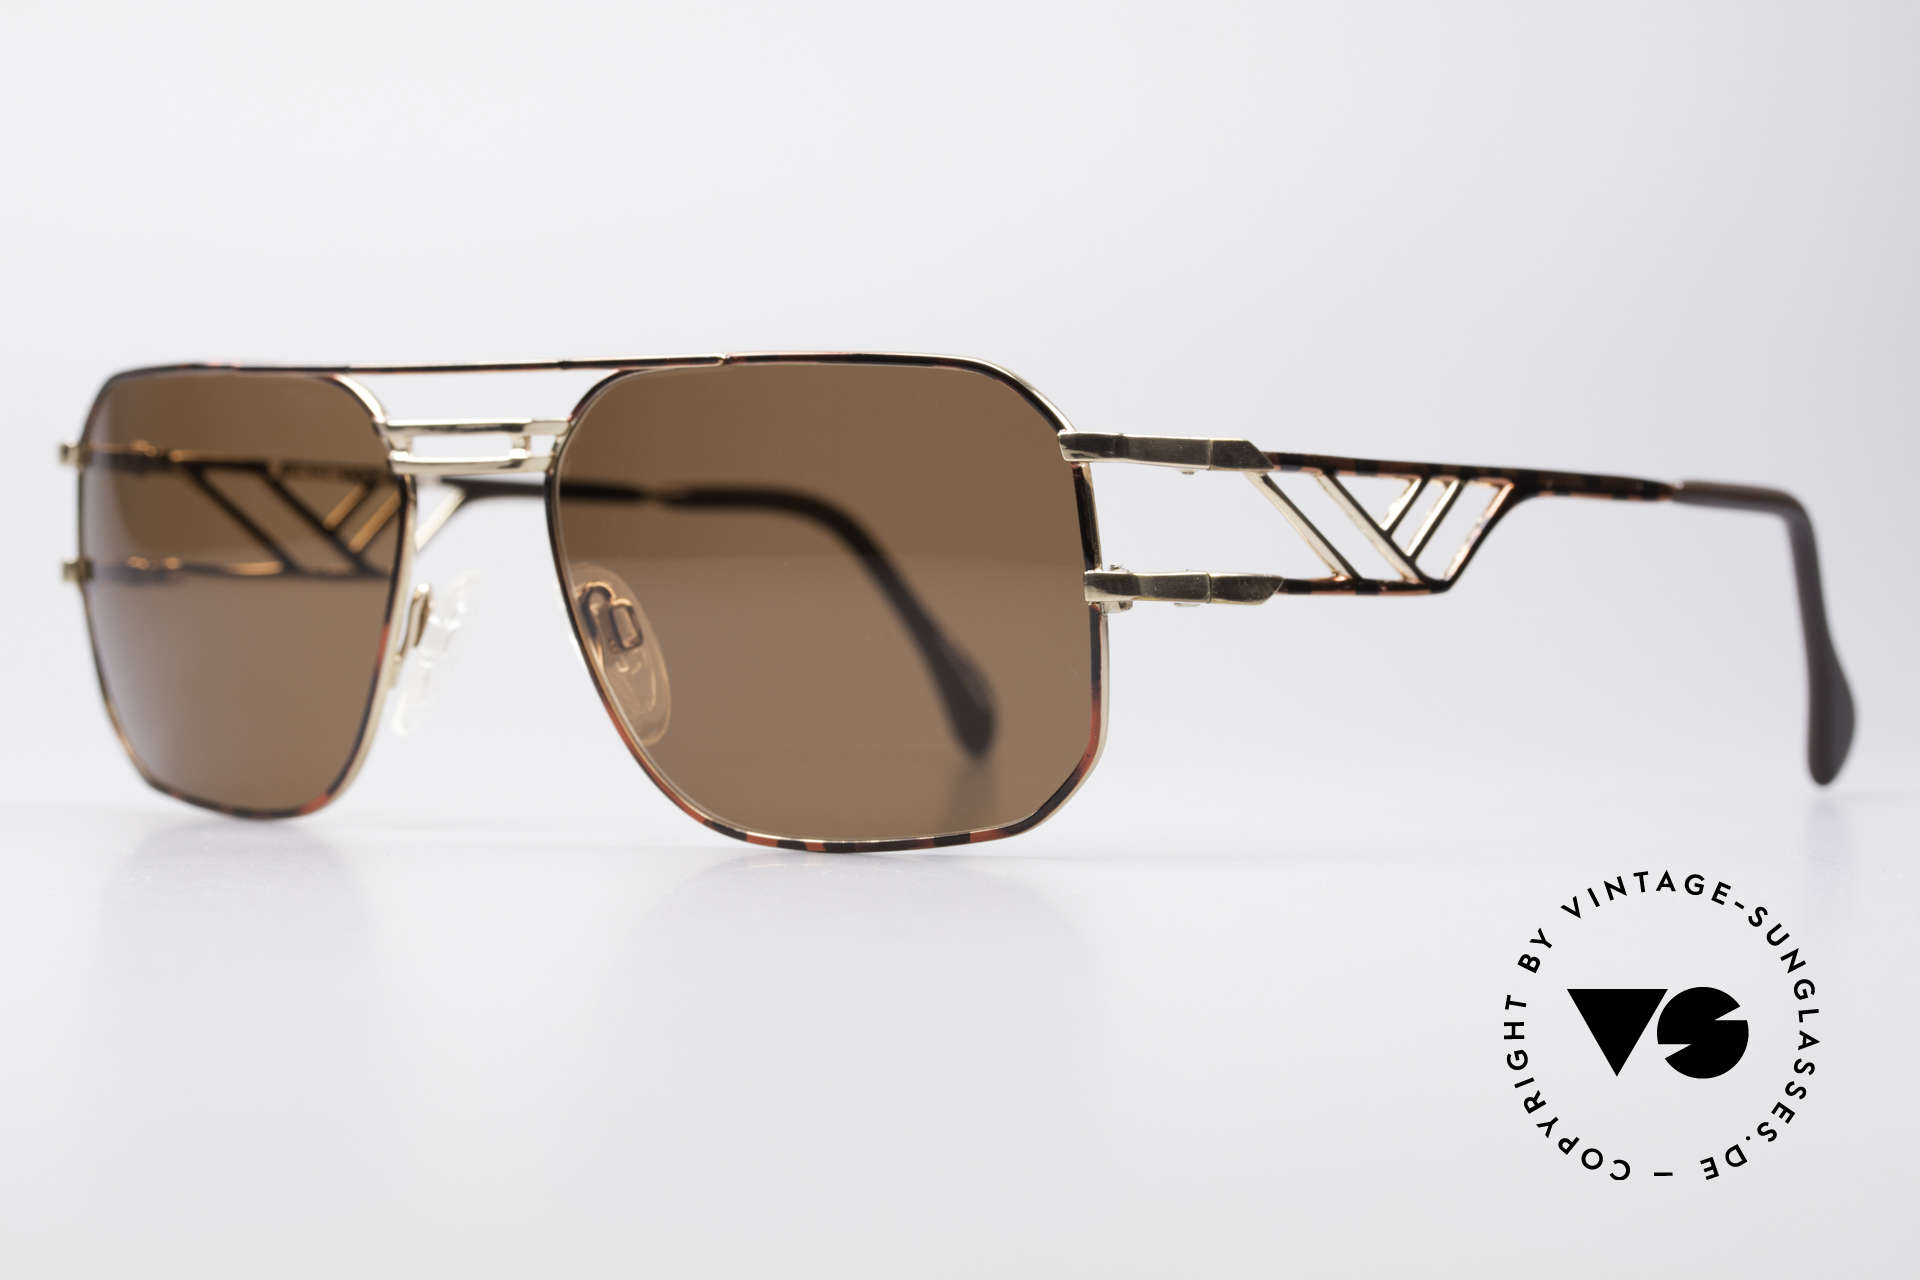 Neostyle Boutique 306 80's Men's Sunglasses Vintage, incredible top-quality from 1986 (built to last), Made for Men